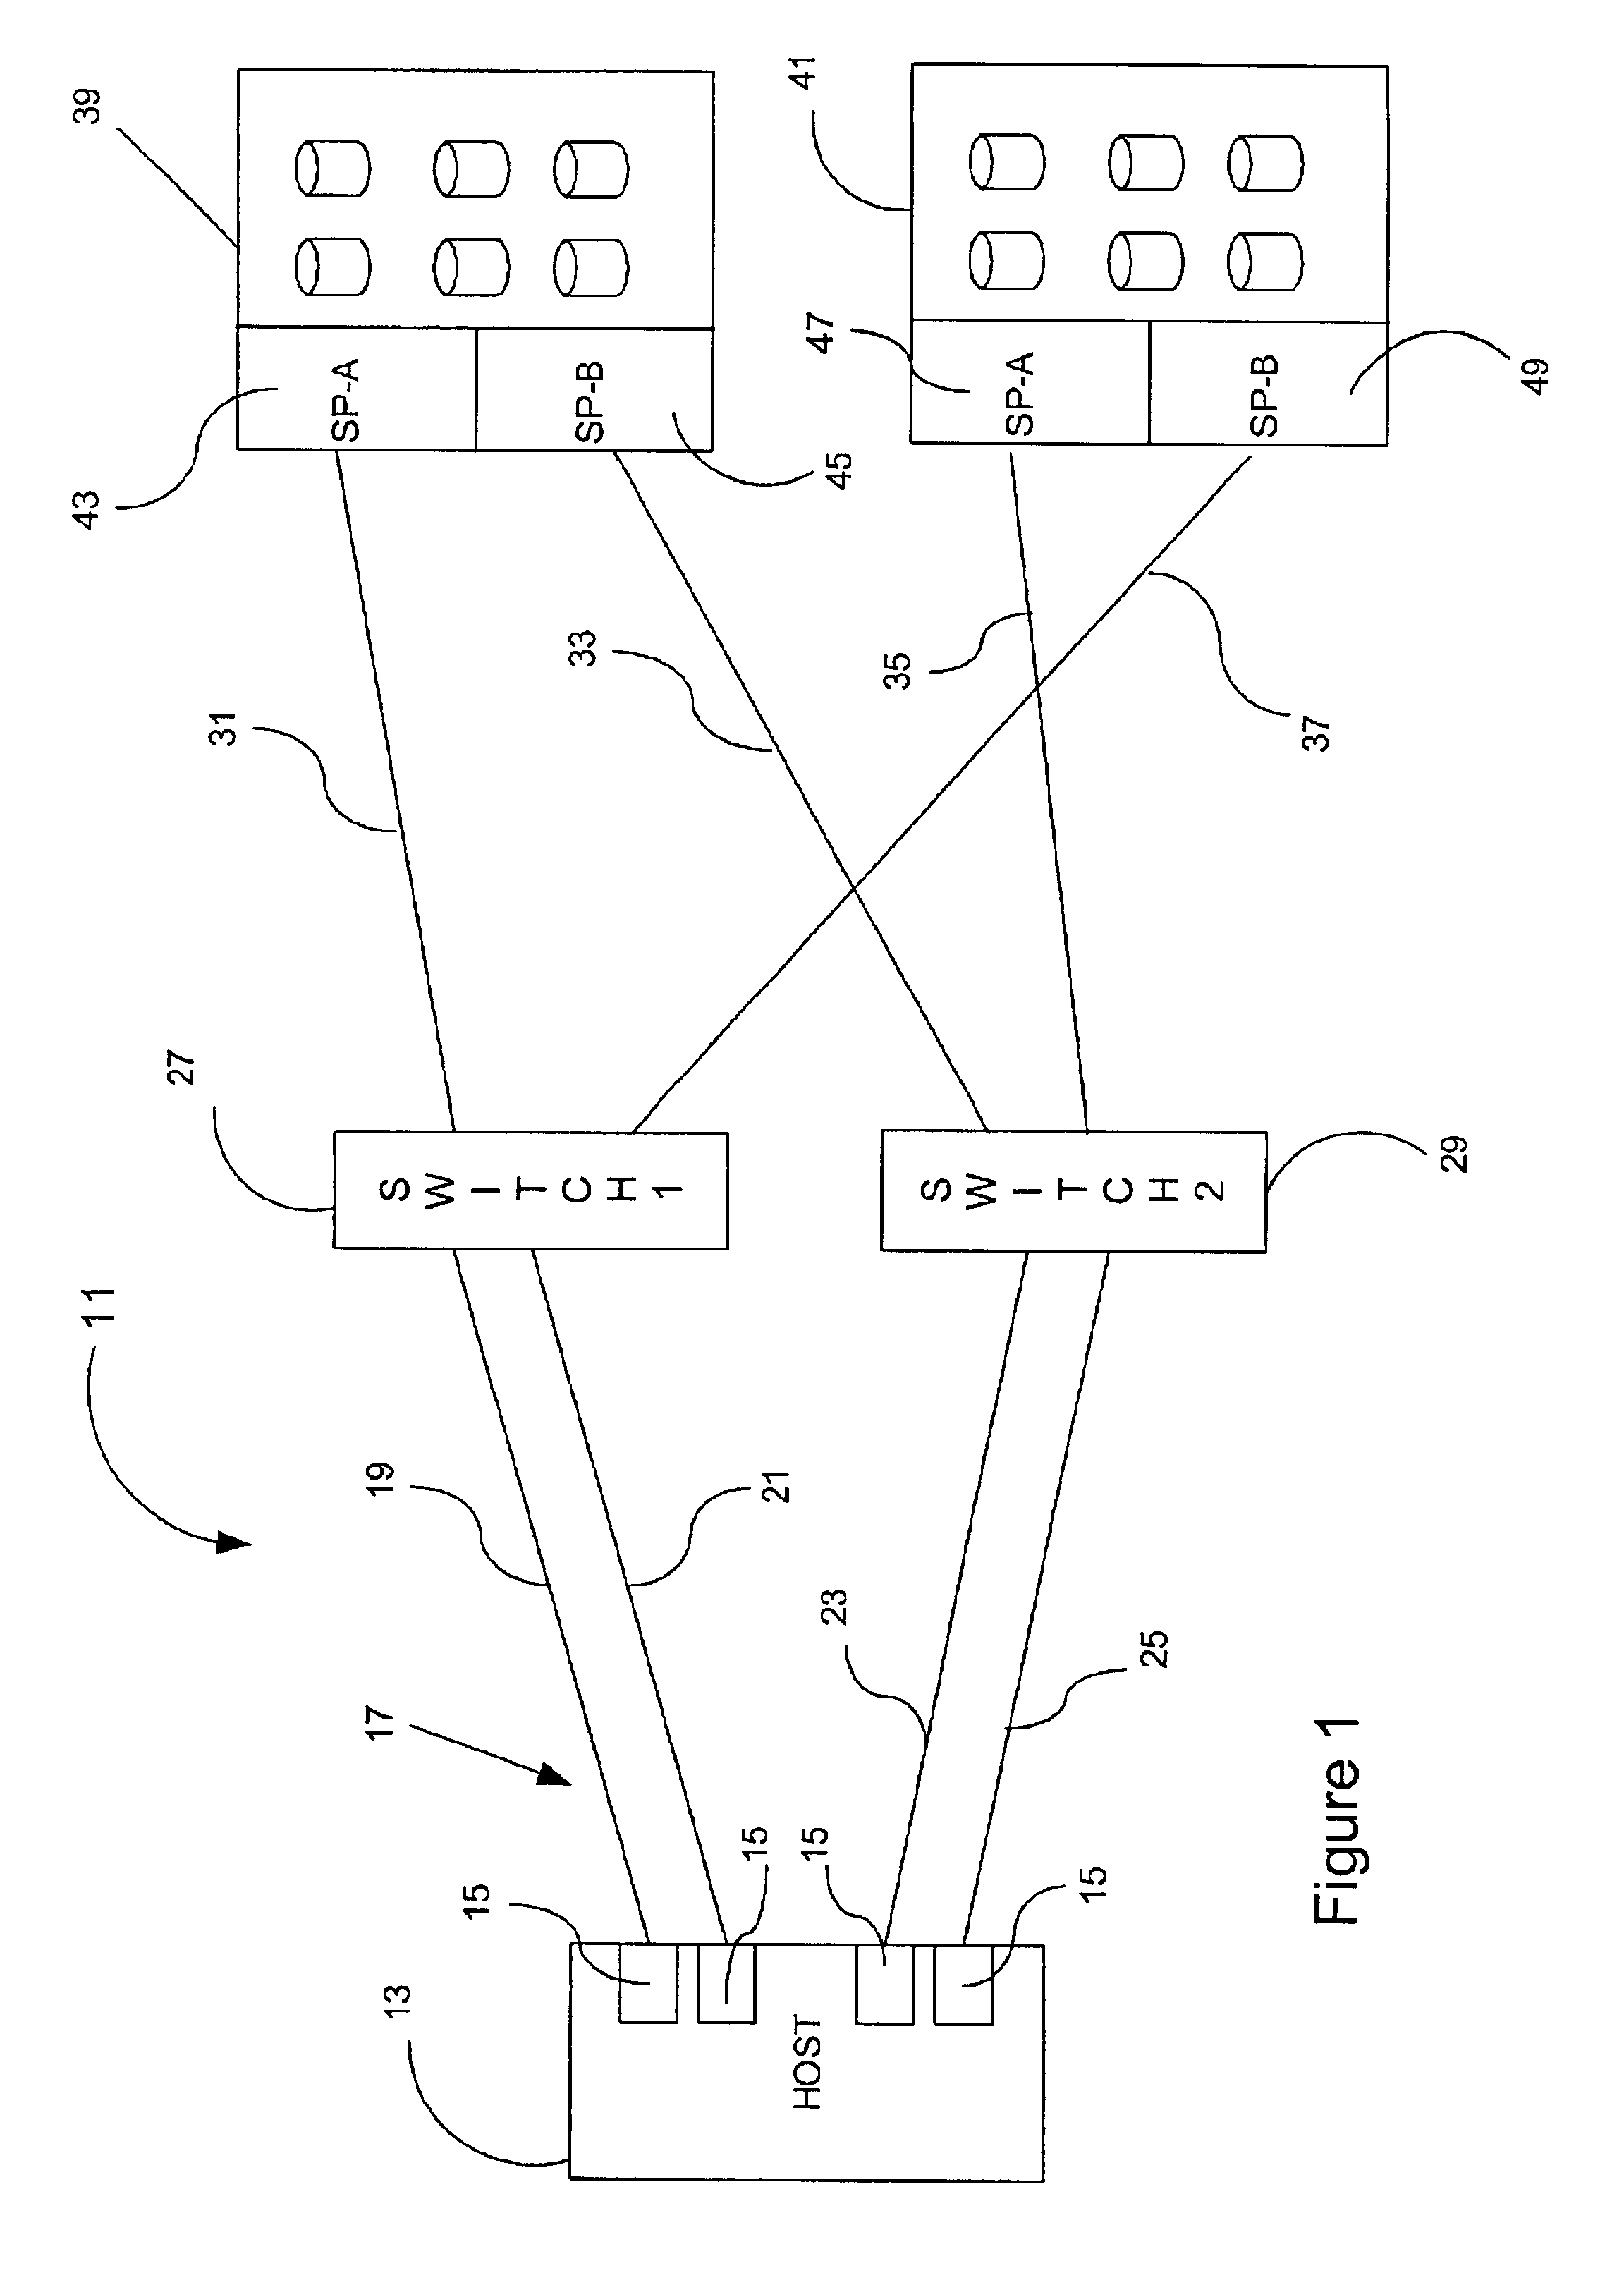 Method and system for pseudo-random testing a fault tolerant network